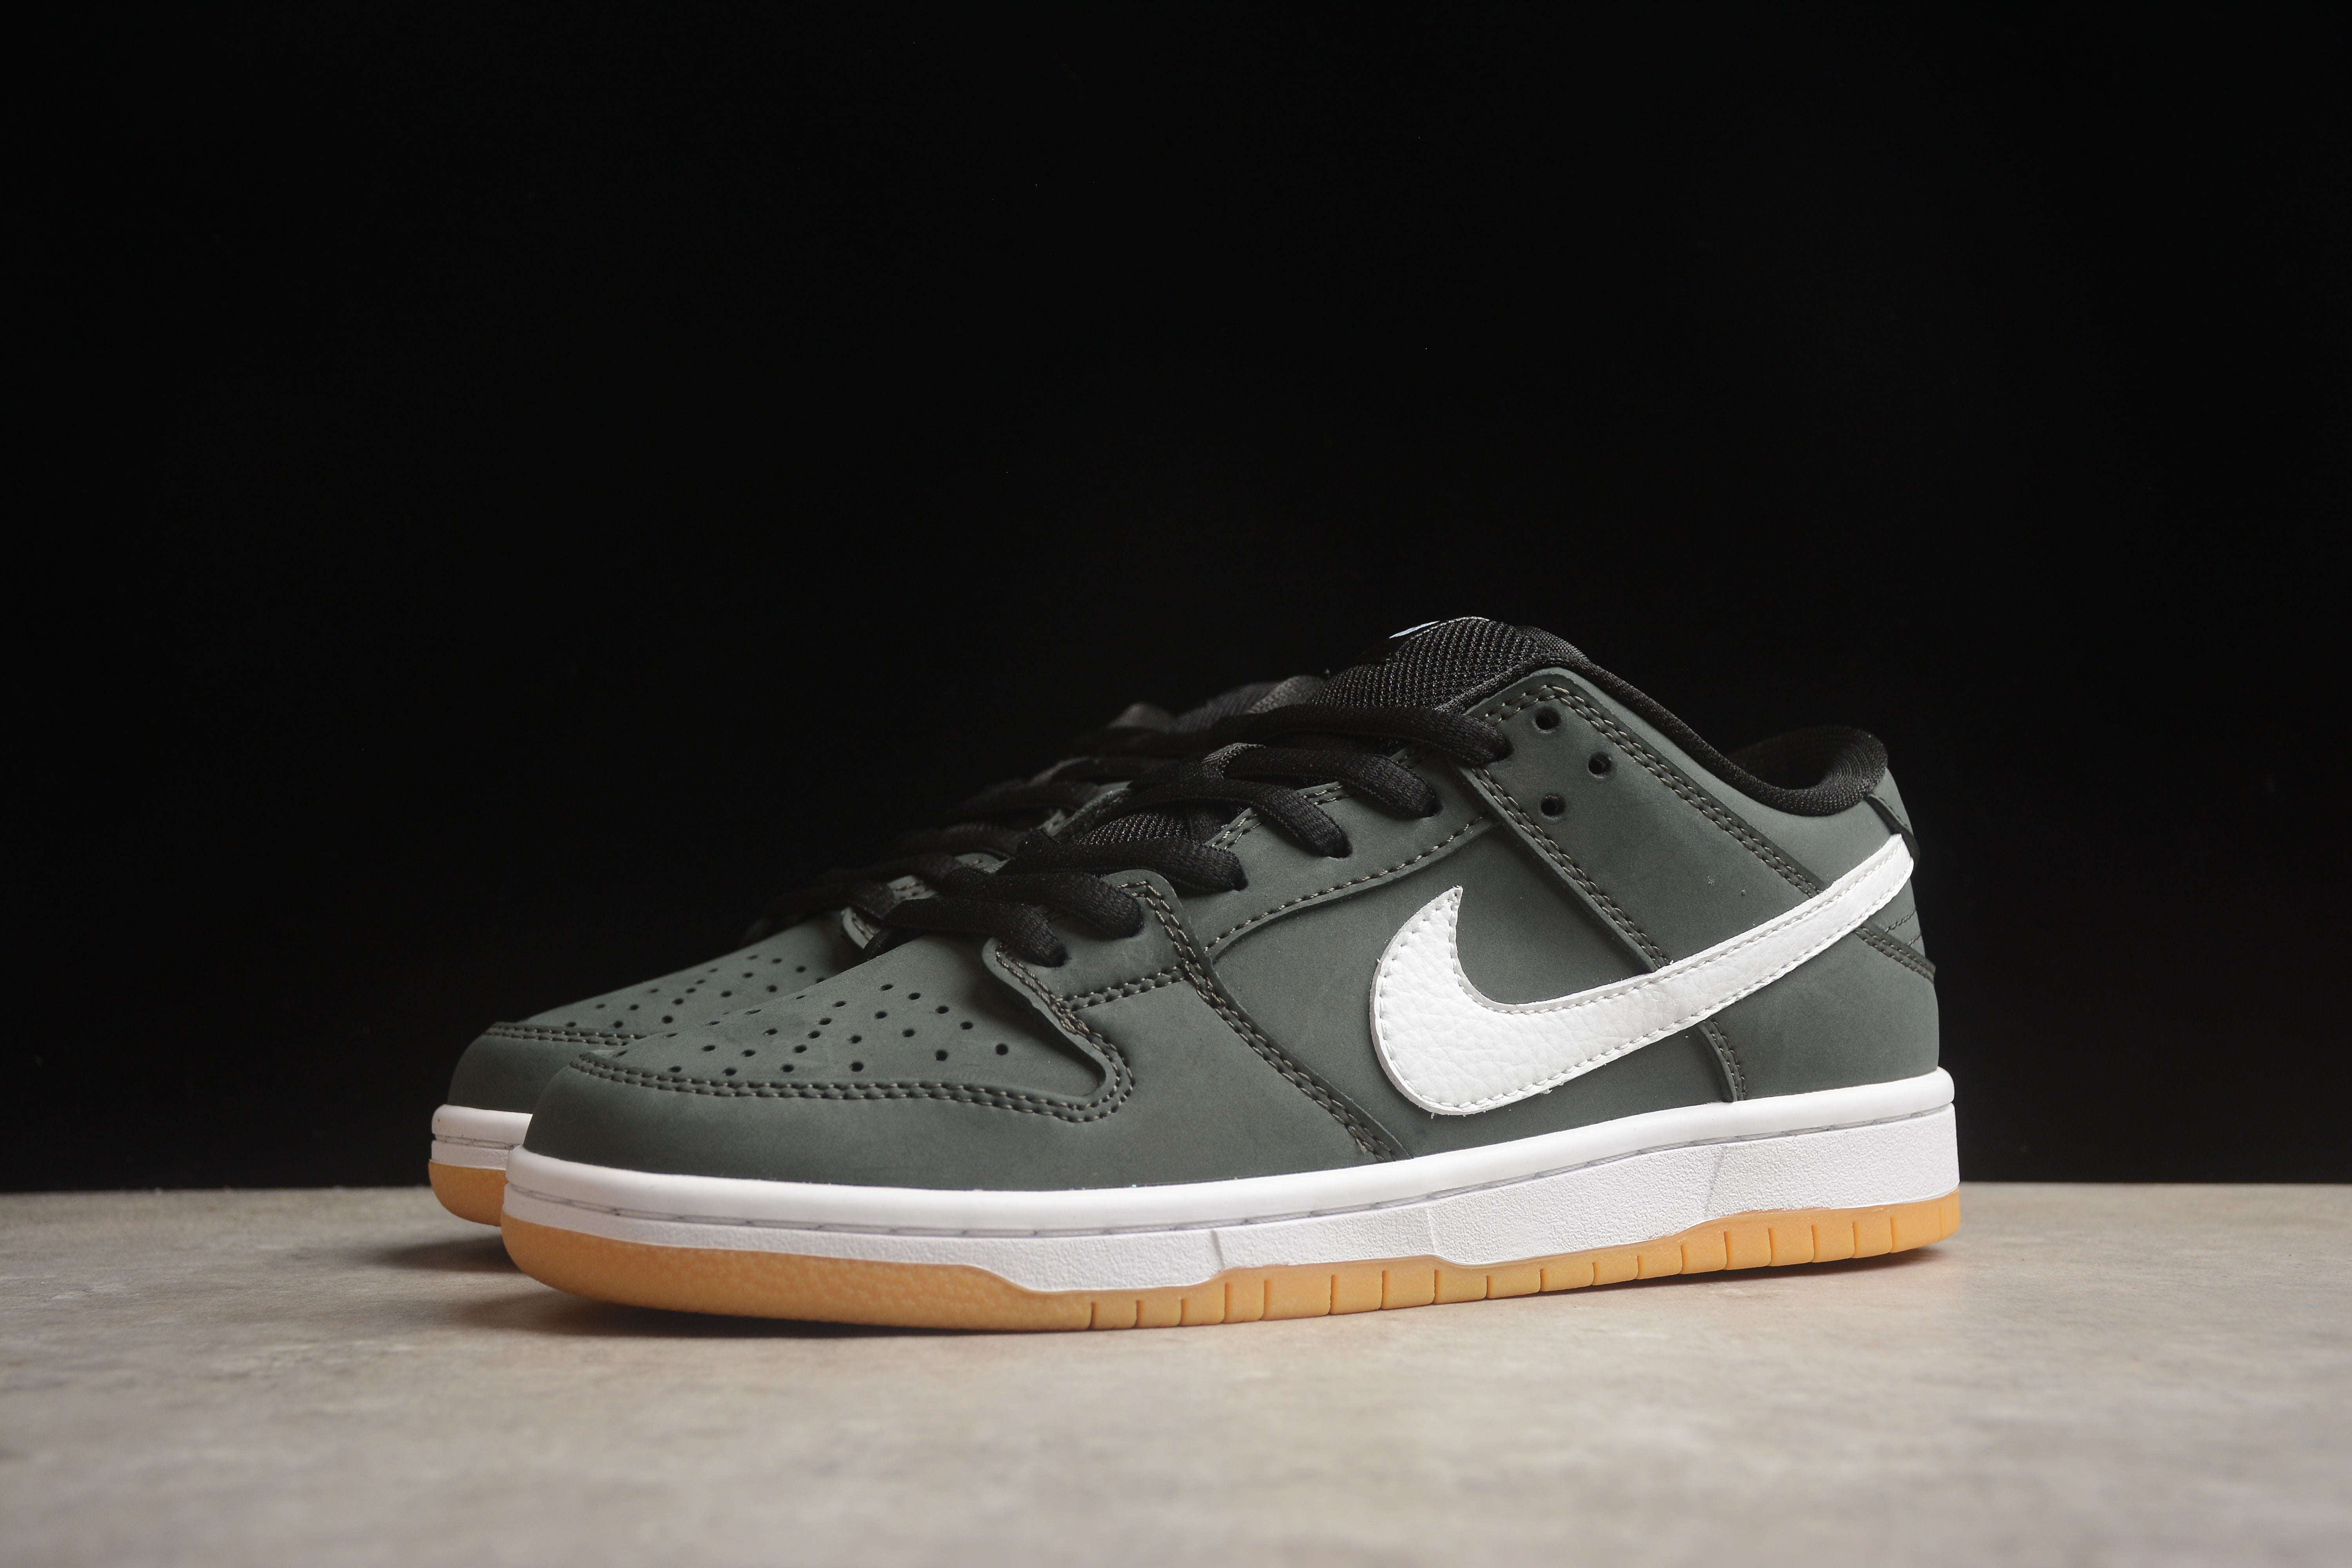 Nike SB dunk low black and white raw shoes